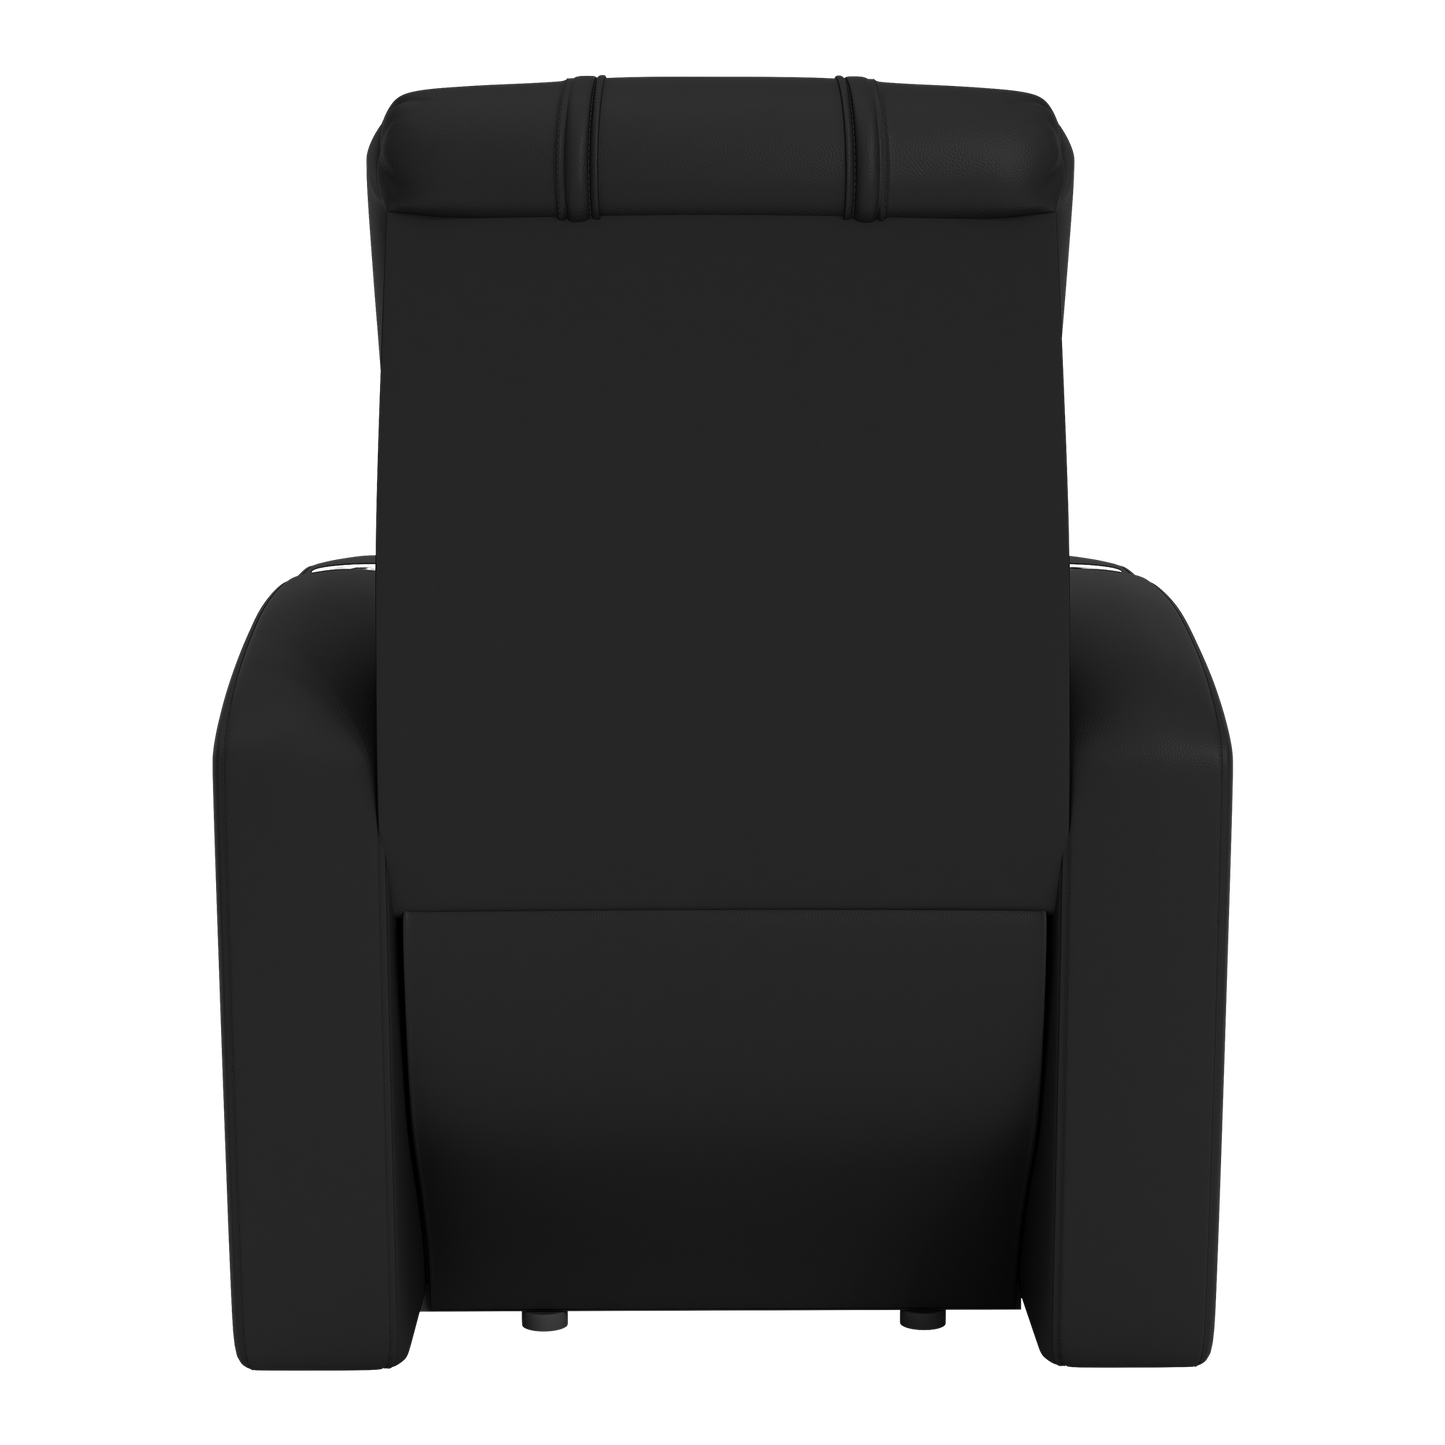 Stealth Recliner with Pittsburgh Panthers Alternate Logo